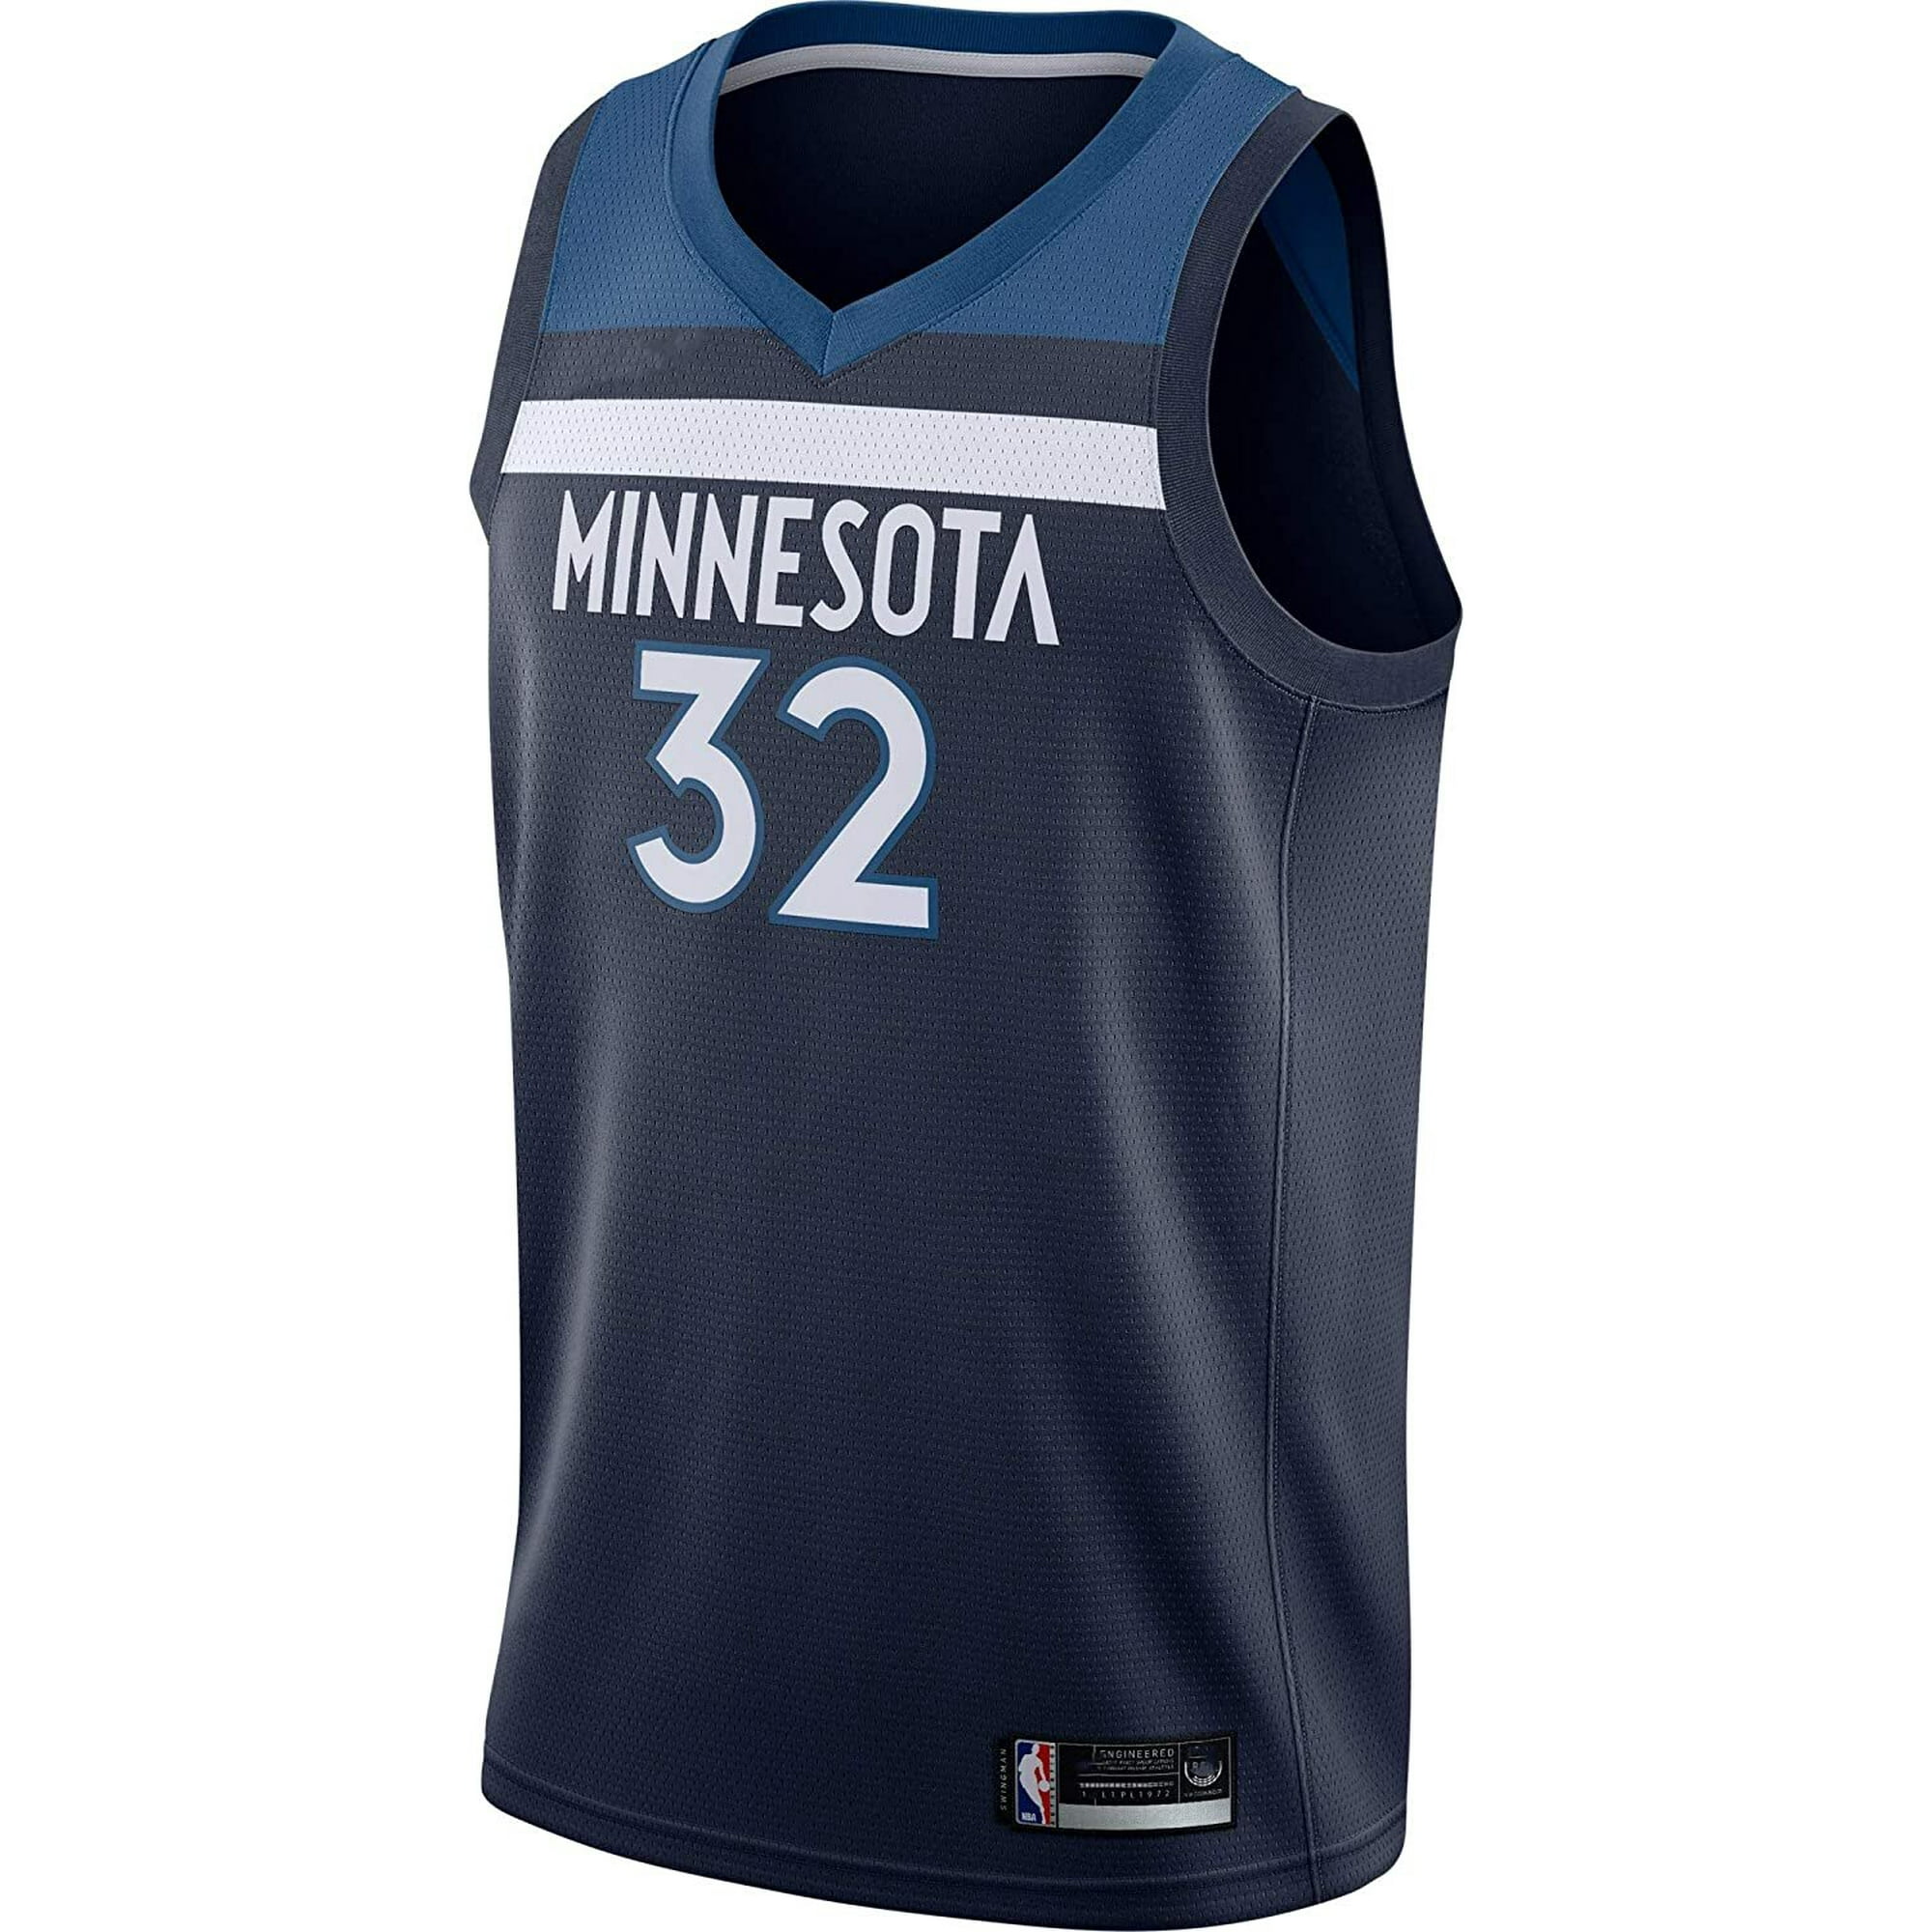 Karl-Anthony Towns Minnesota Timberwolves #32 Official Youth 8-20